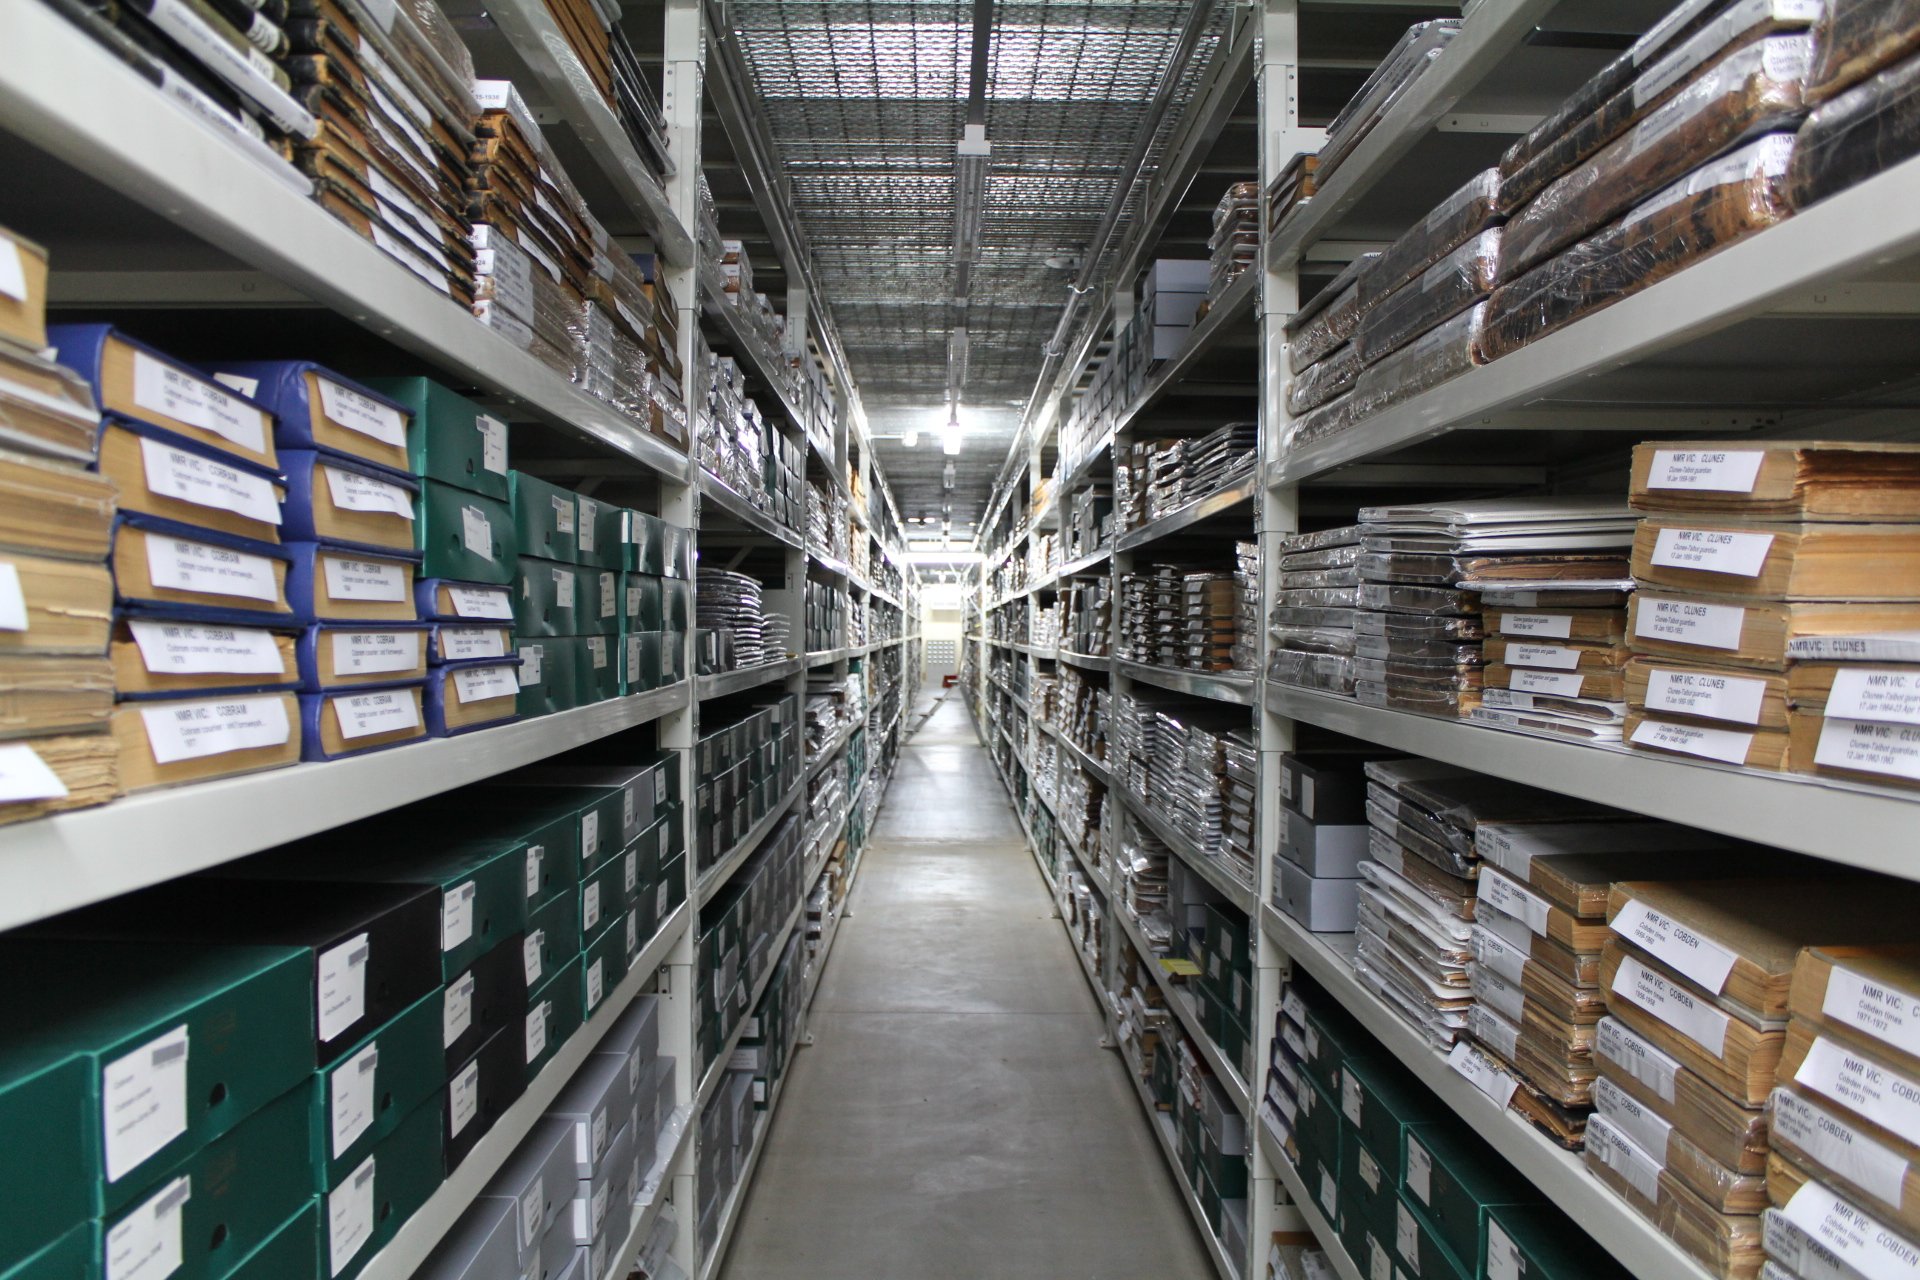 Rows of items in State Library Victoria's current storage facility.